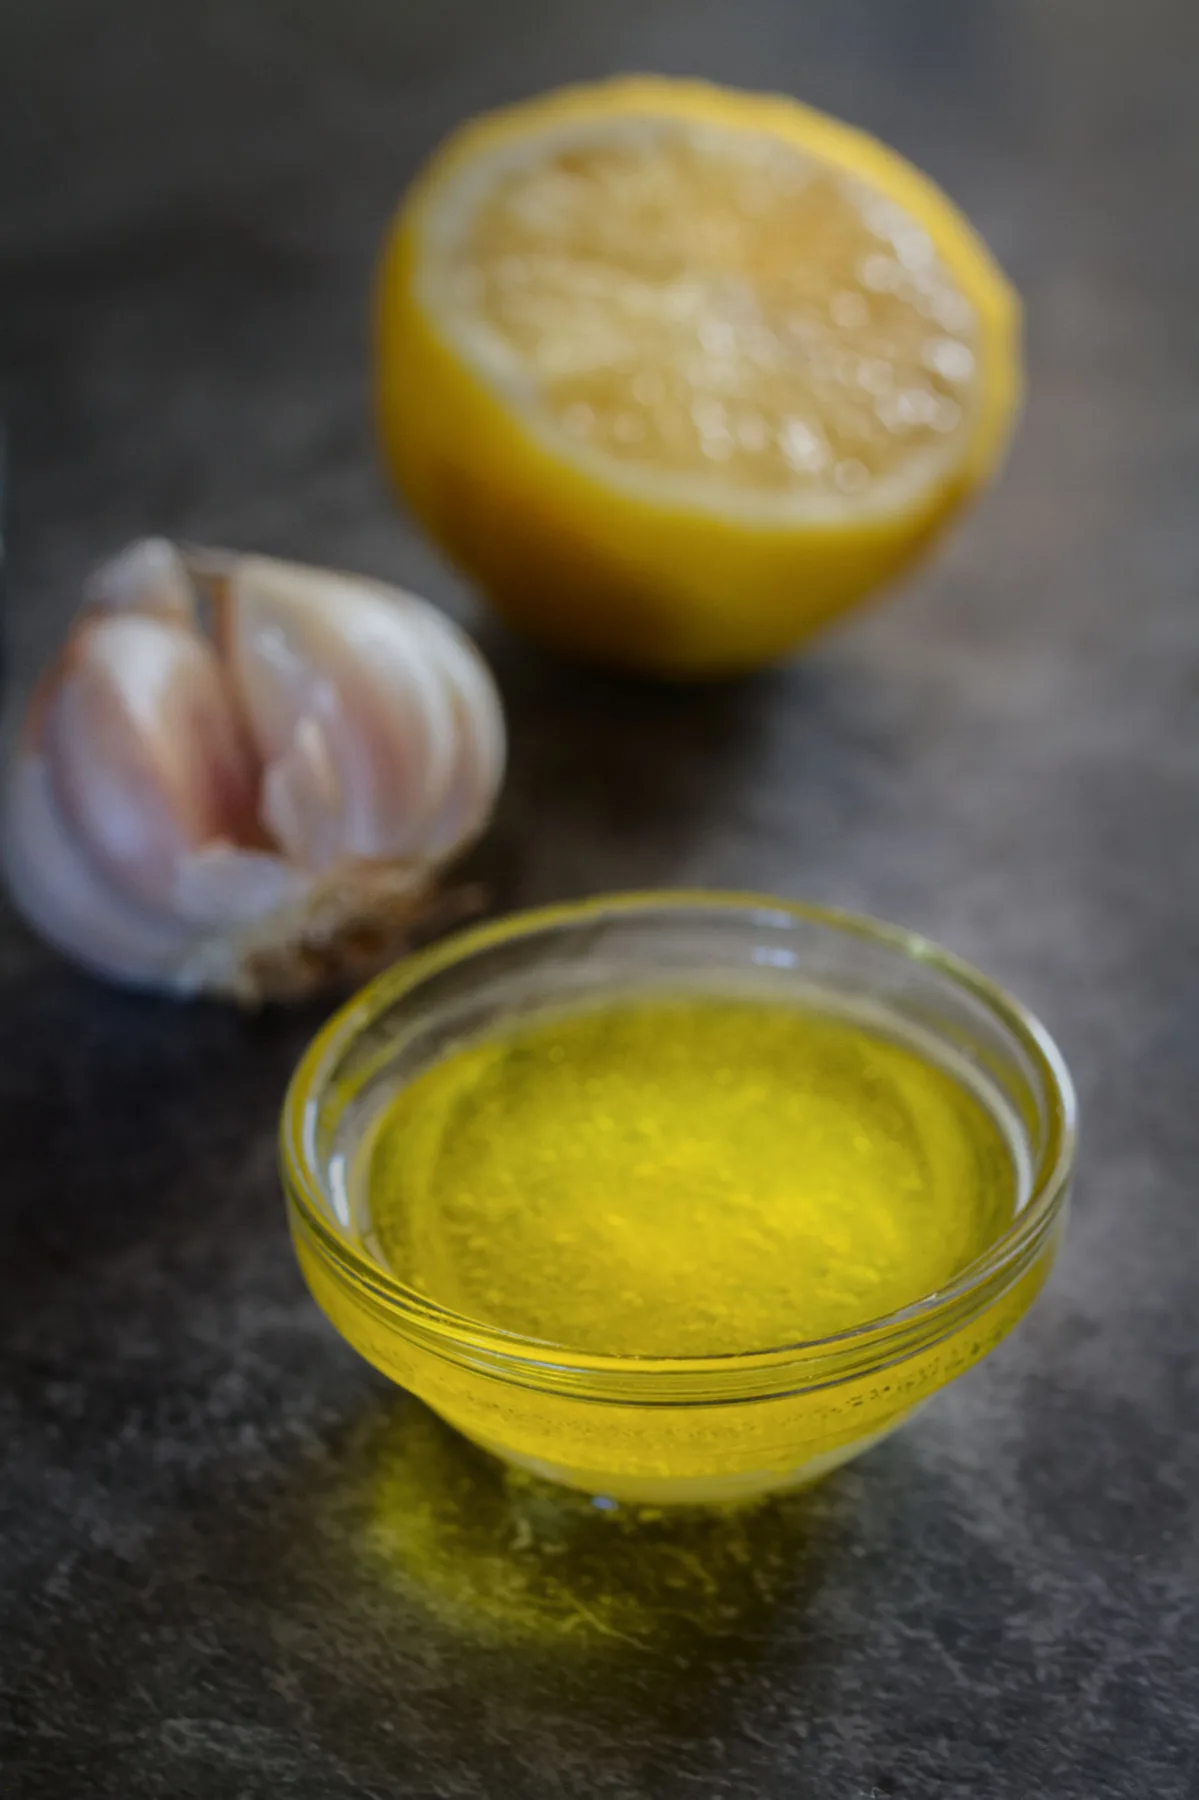 A wedge of lemon sits beside some olive oil and a clove of garlic.